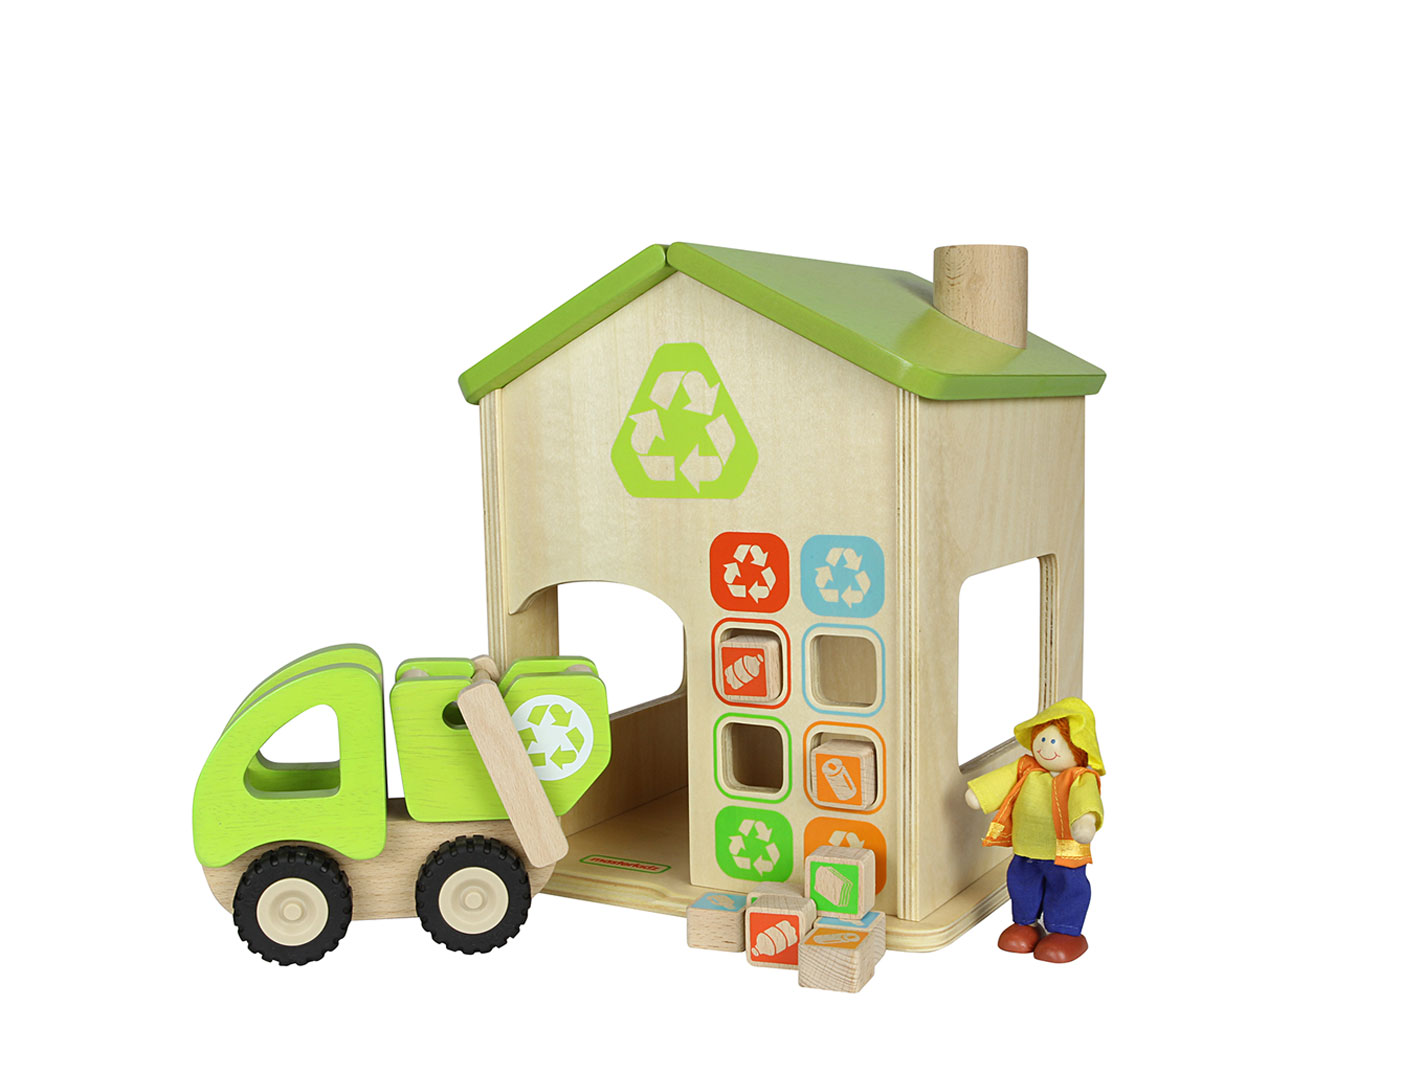 Masterkidz beiside small wood recycling station game toys1